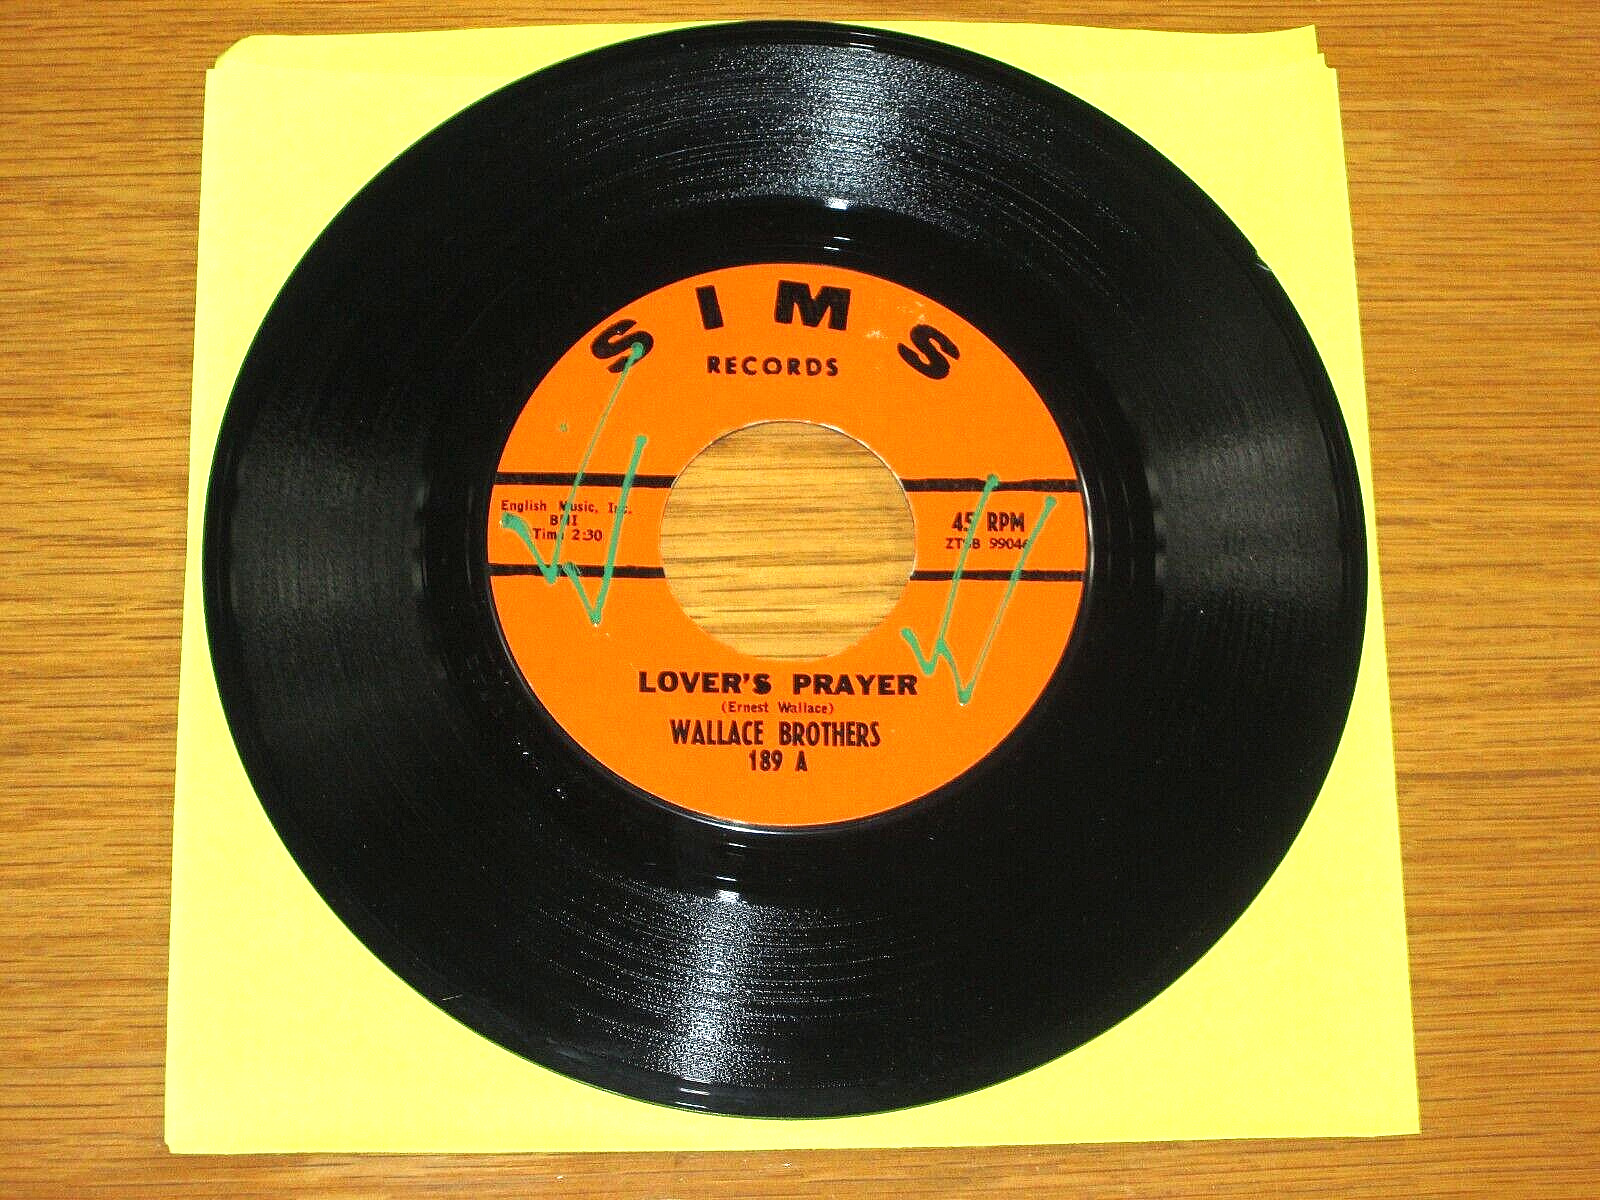 SOUL 45 RPM - WALLACE BROTHERS - SIMS 189 - \